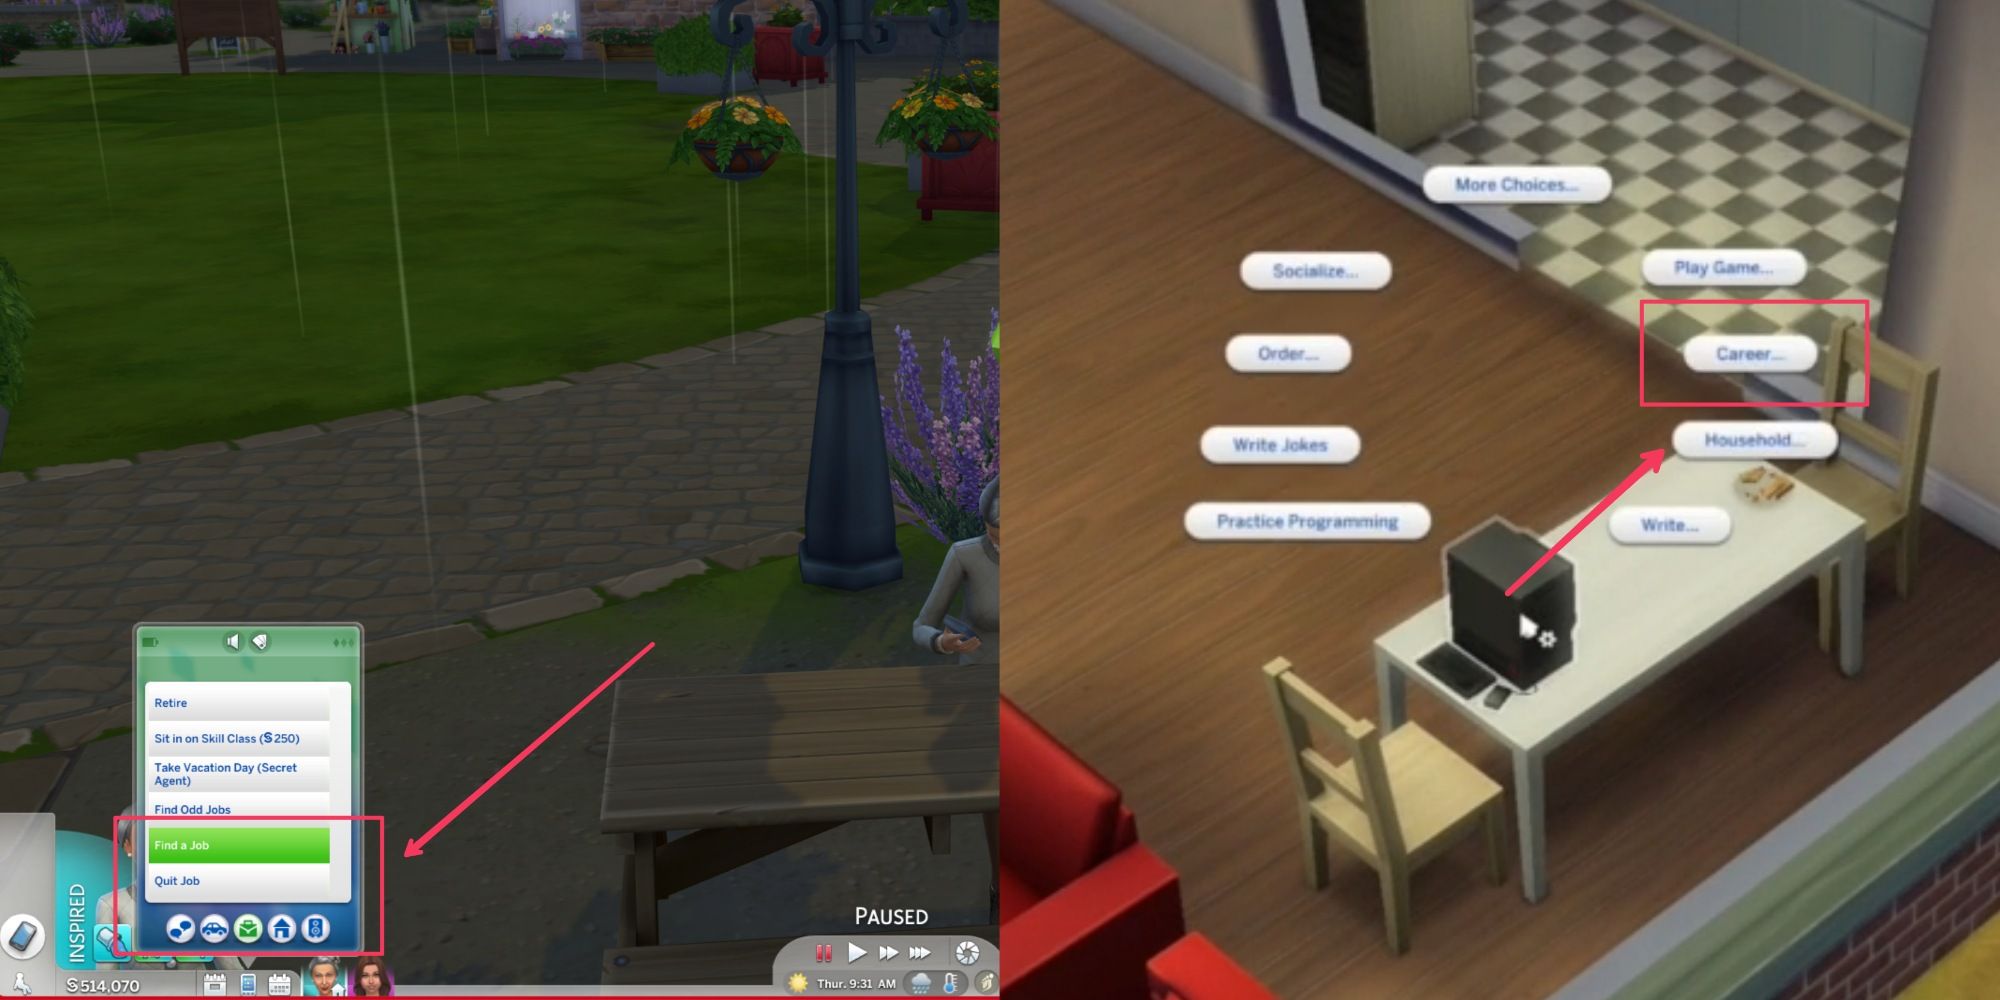 the get a job option on the phone and career option on the computer in the sims 4